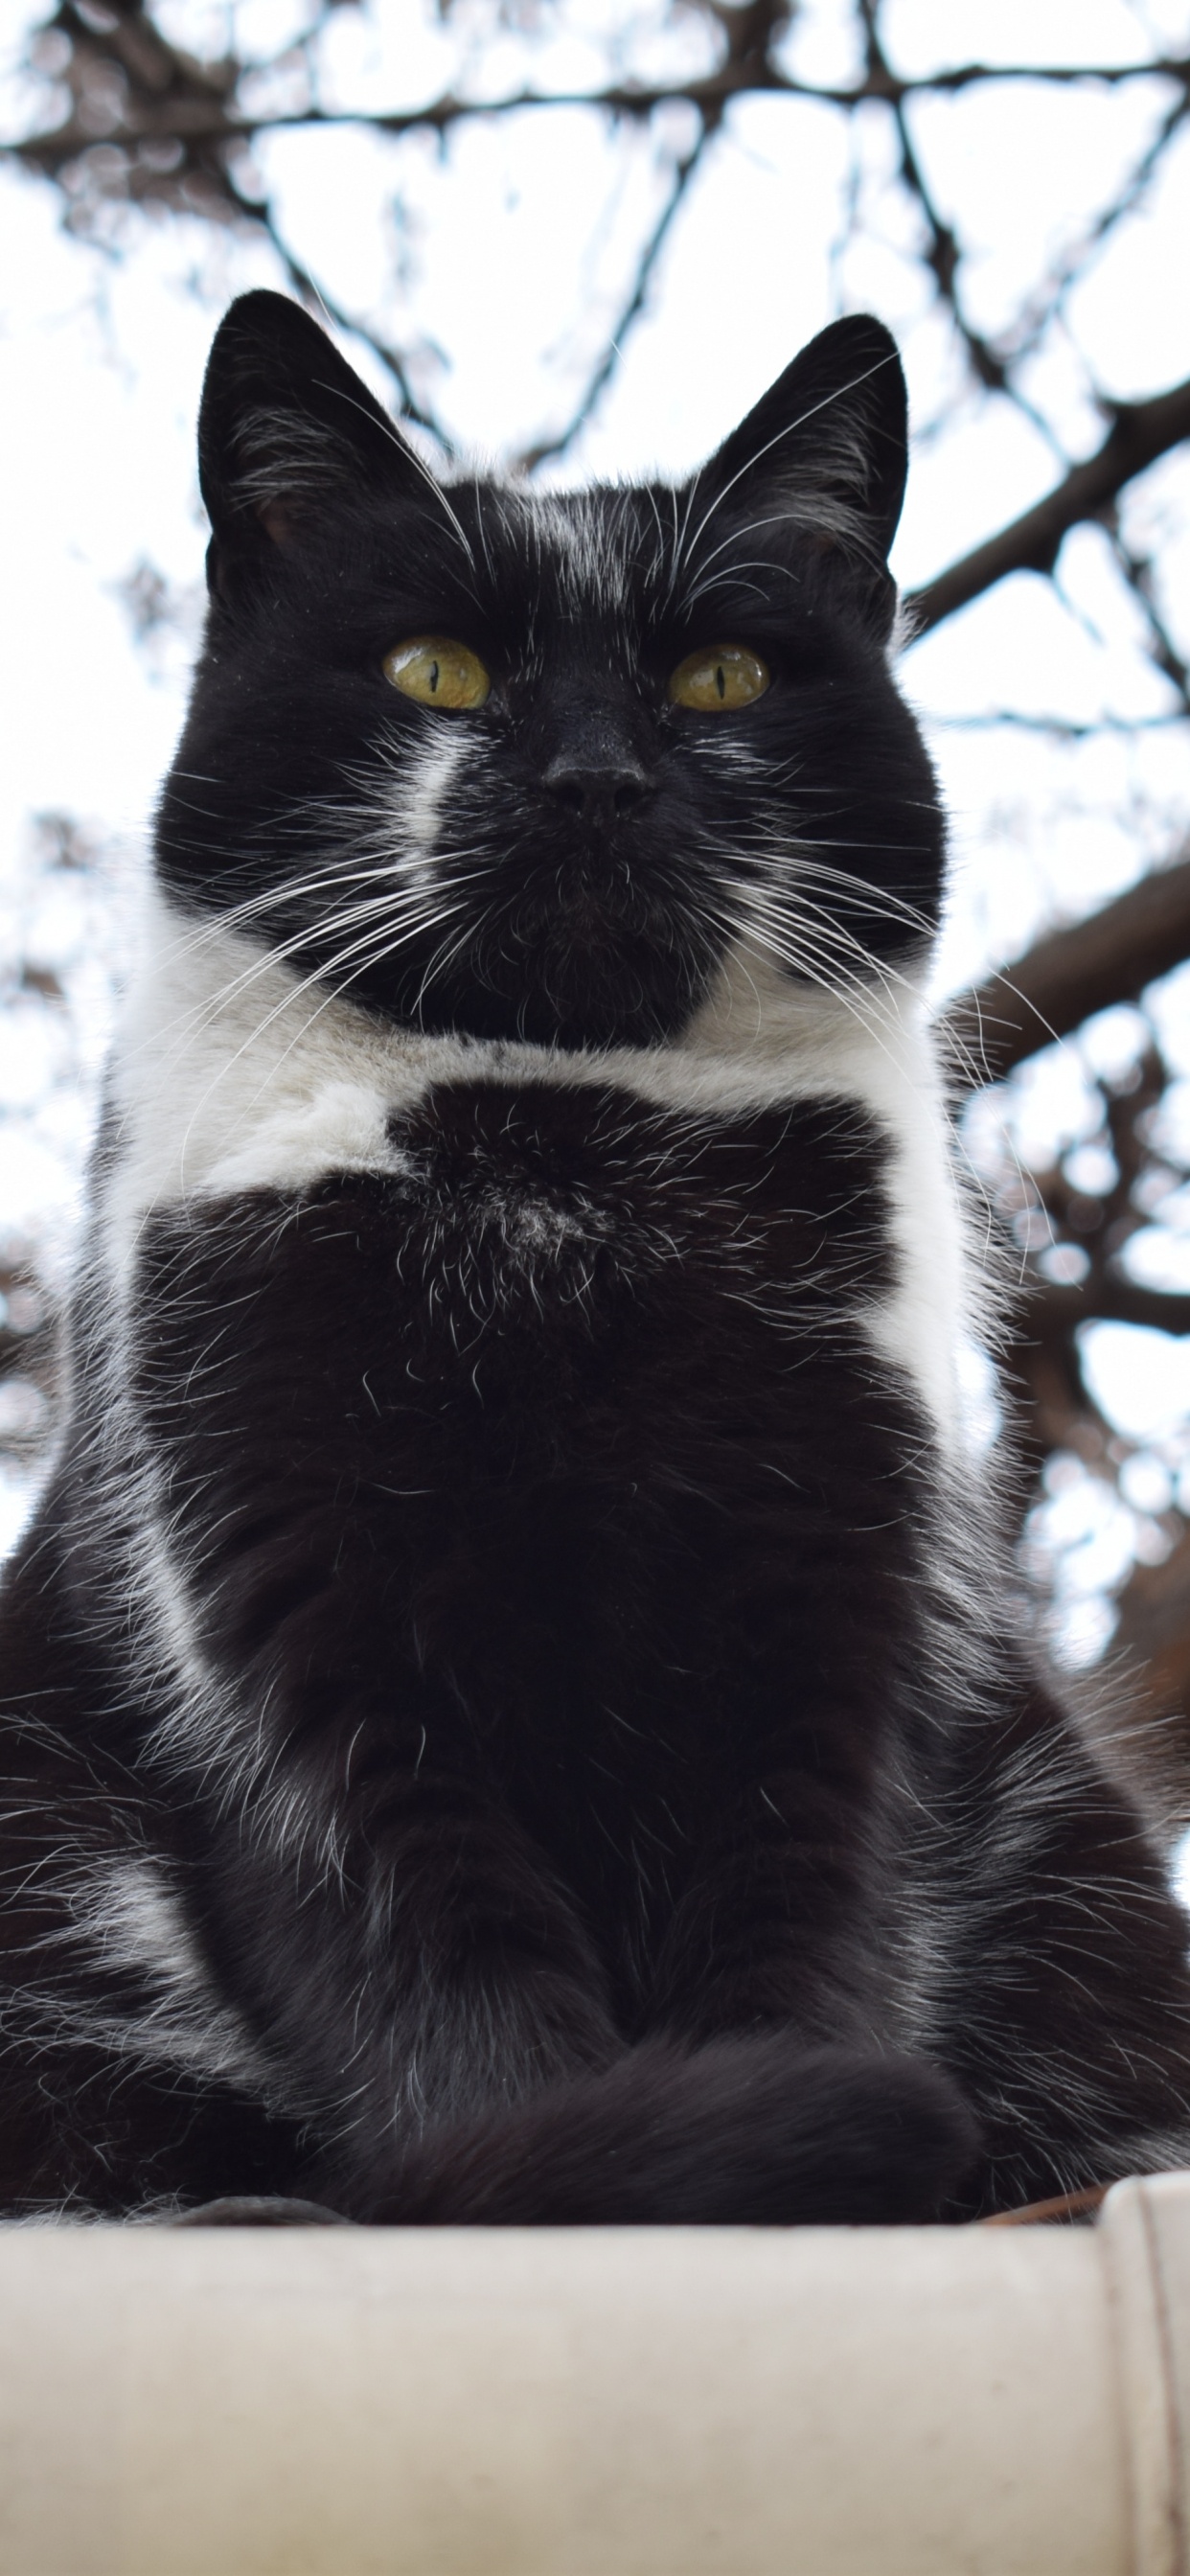 Tuxedo Cat on Brown Wooden Fence During Daytime. Wallpaper in 1242x2688 Resolution